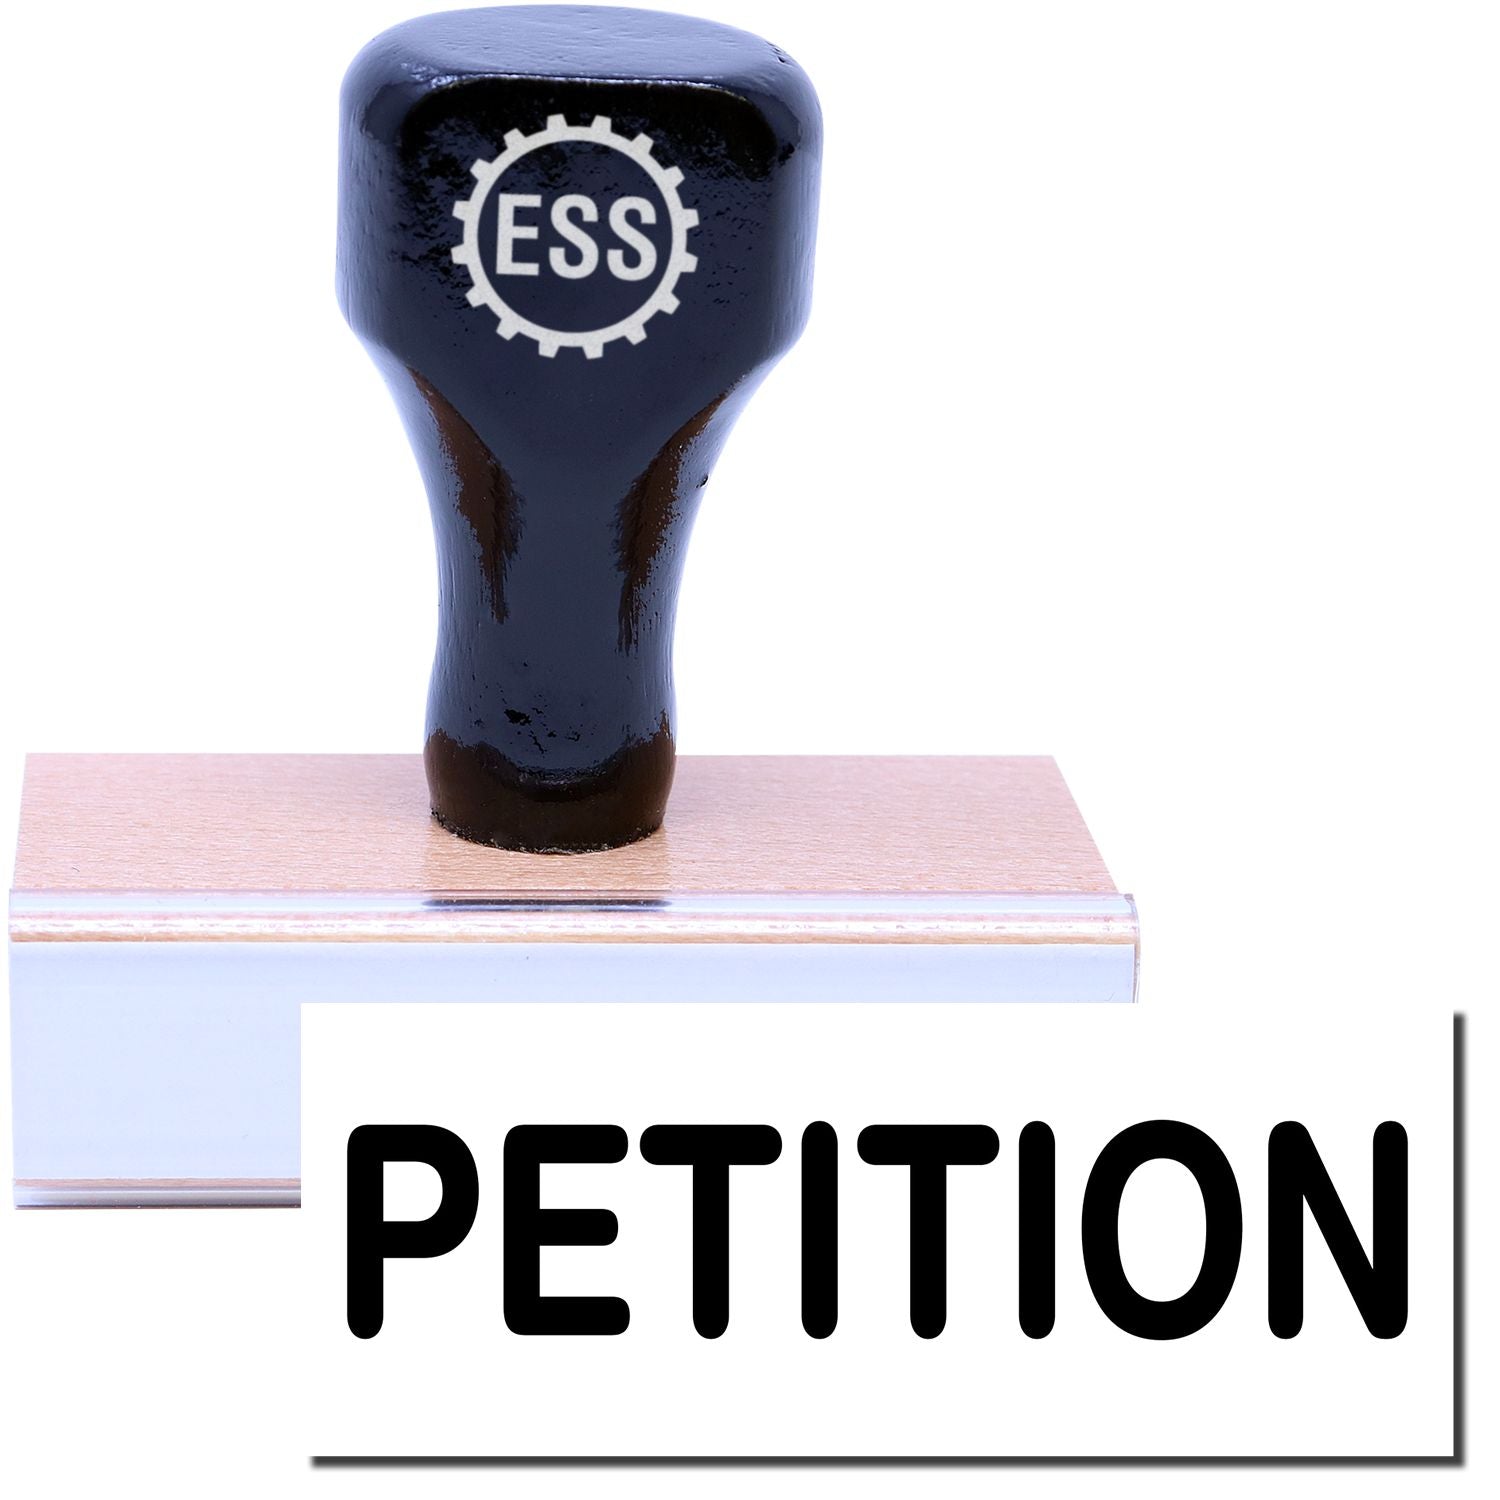 A stock office rubber stamp with a stamped image showing how the text "PETITION" in a large font is displayed after stamping.